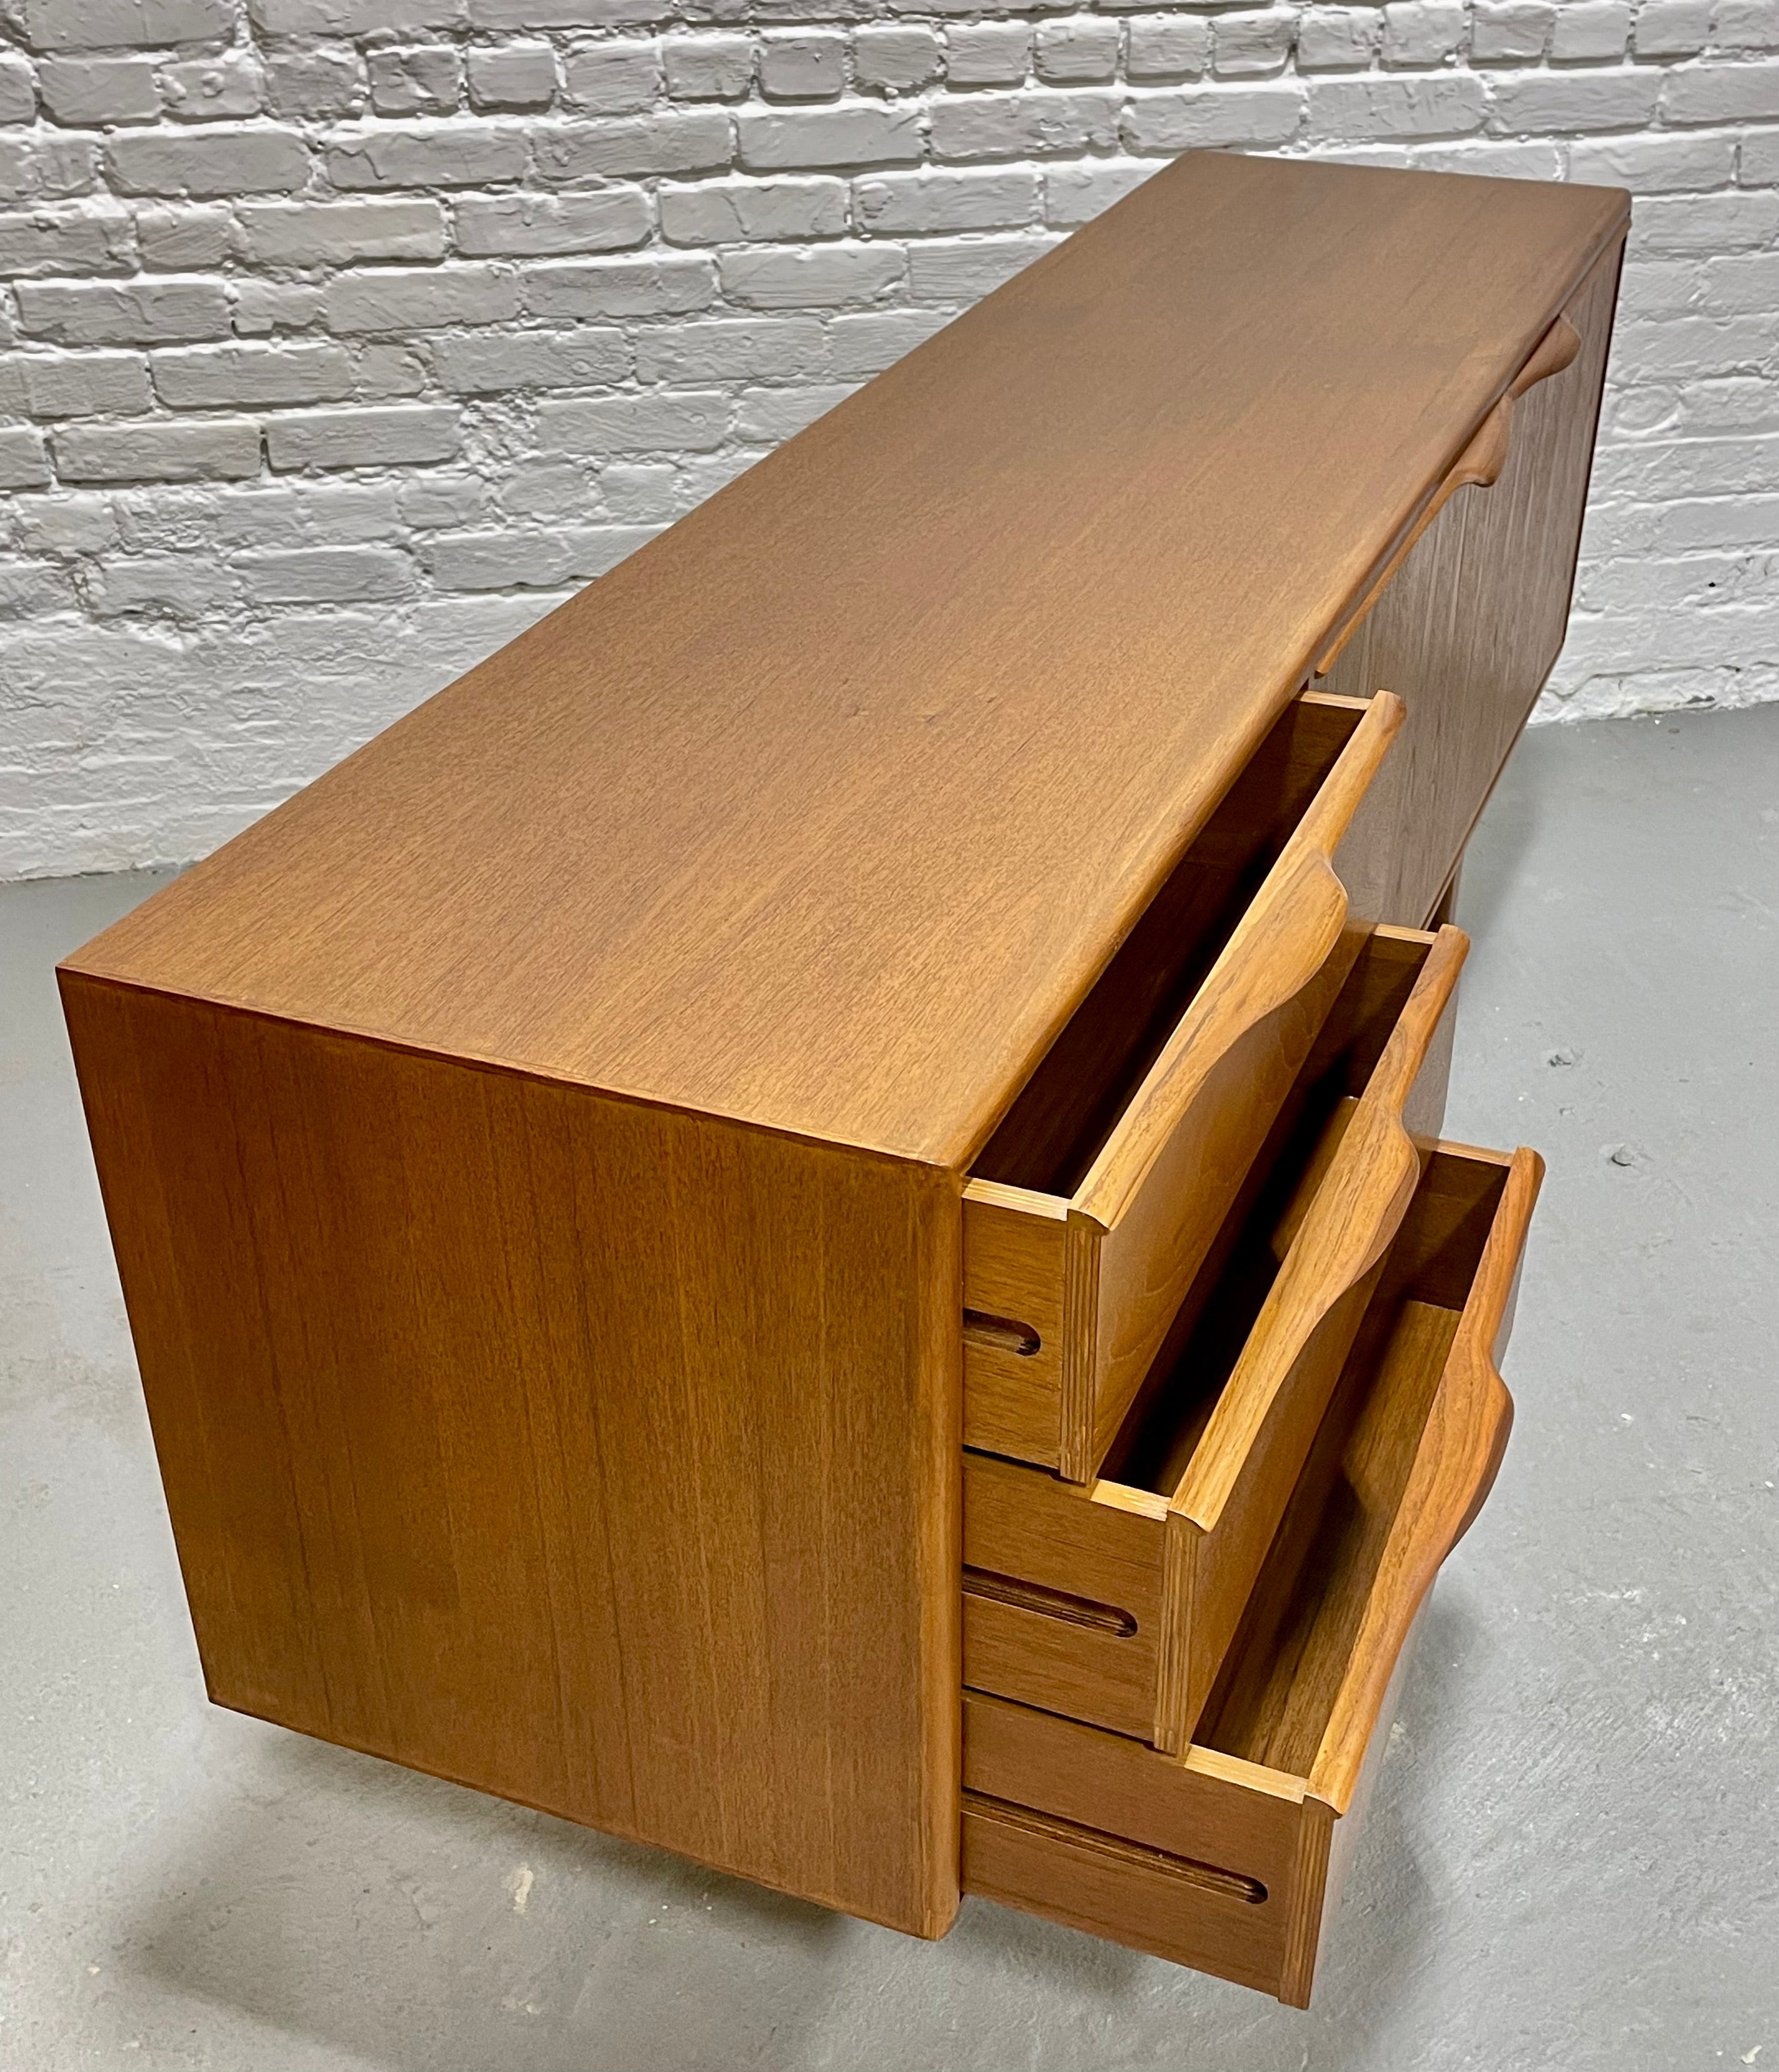 FUNKY + Sculptural Mid Century MODERN styled CREDENZA / Media Stand / Sideboard